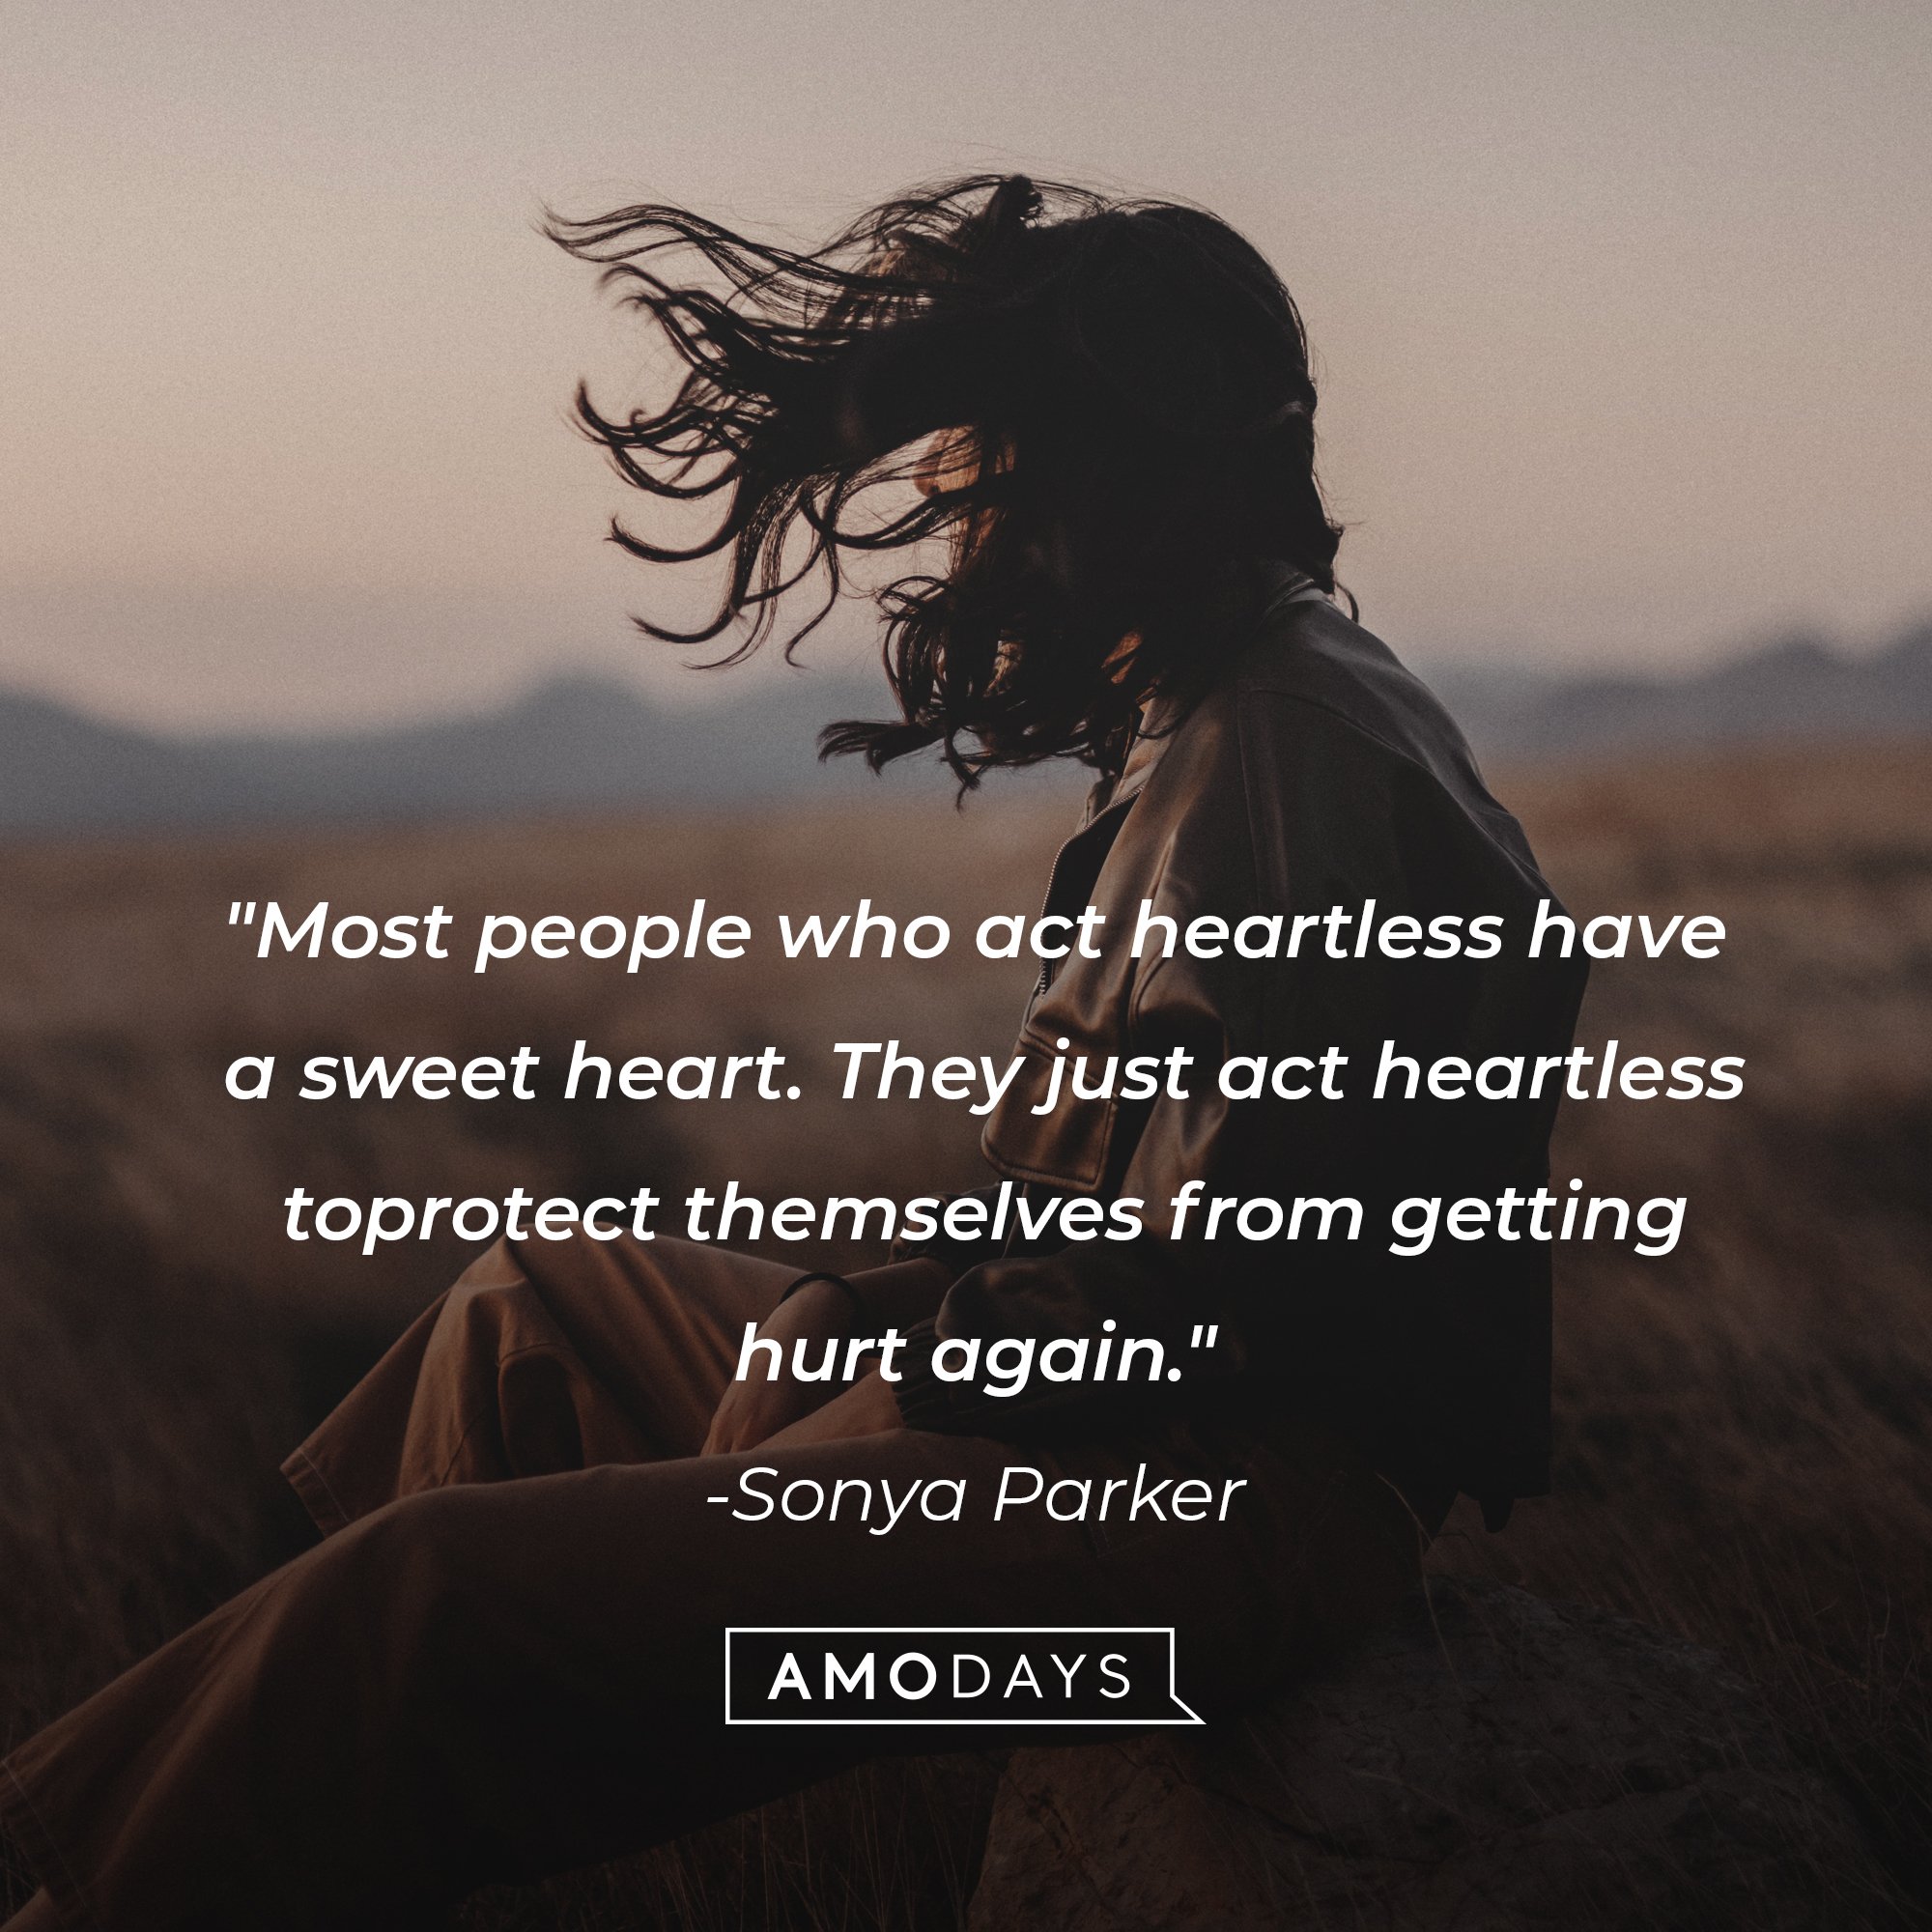 Sonya Parker's quote: "Most people who act heartless have a sweet heart. They just act heartless to protect themselves from getting hurt again." | Image: AmoDays